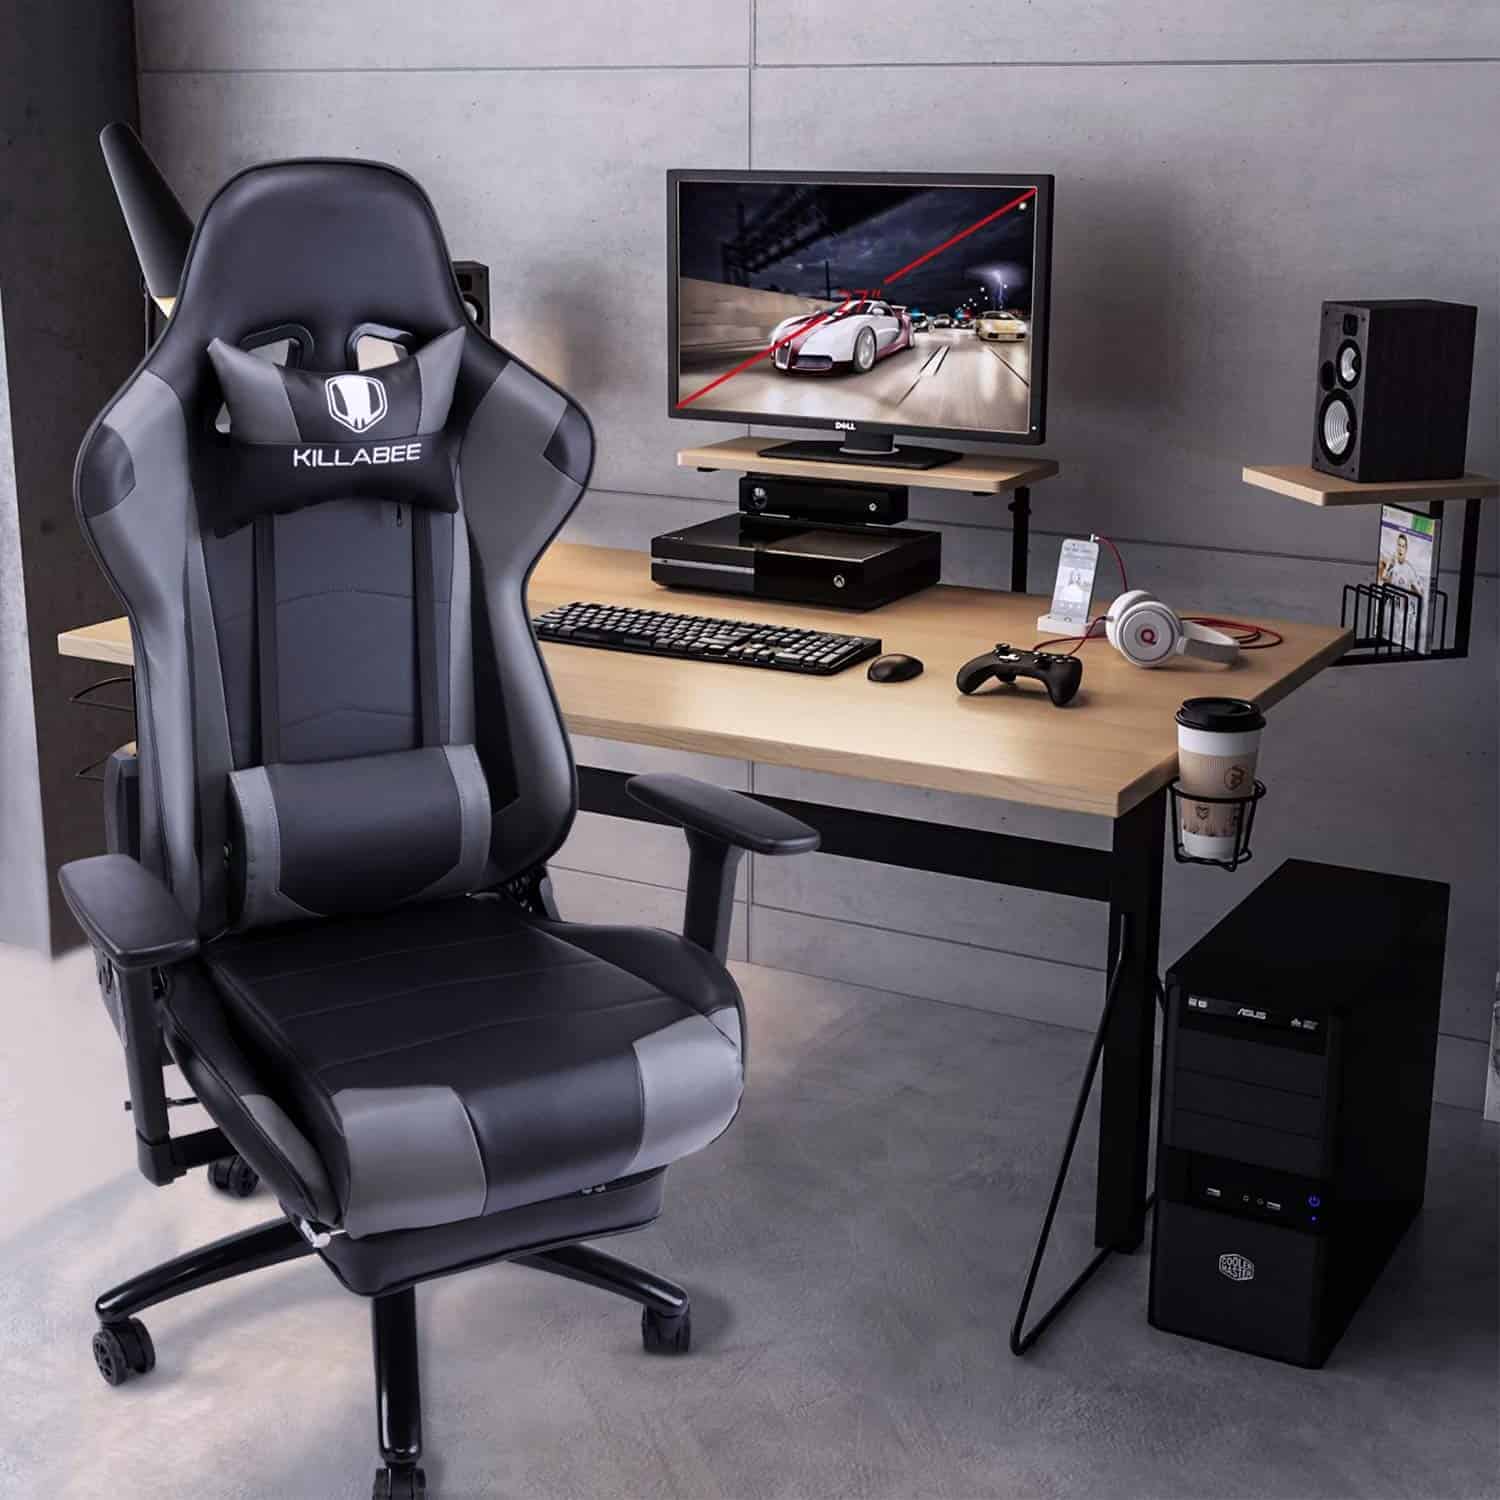 Killabee Gaming Chair Review - Gamer's Review - The Arcade Man